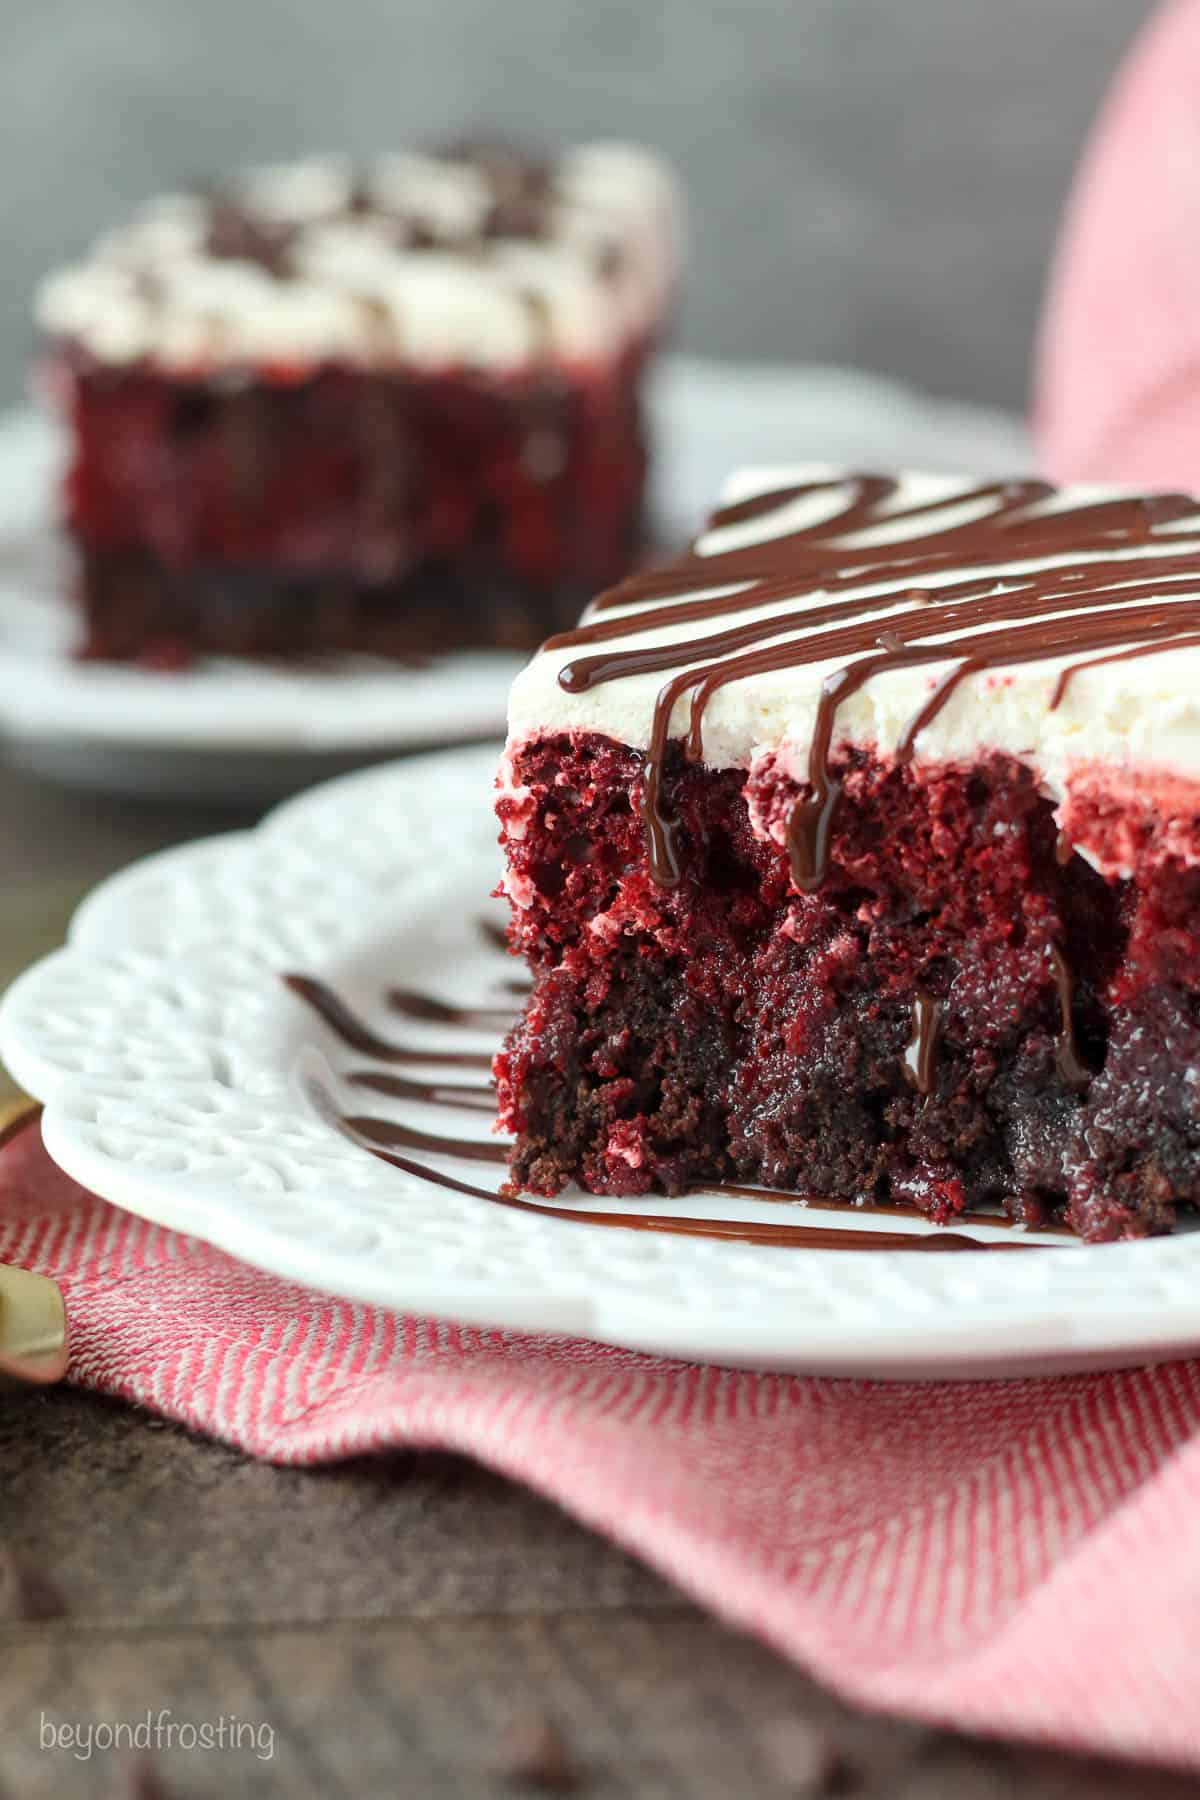 A slice of red velvet brownie cake on a plate with another slice on a dish behind it